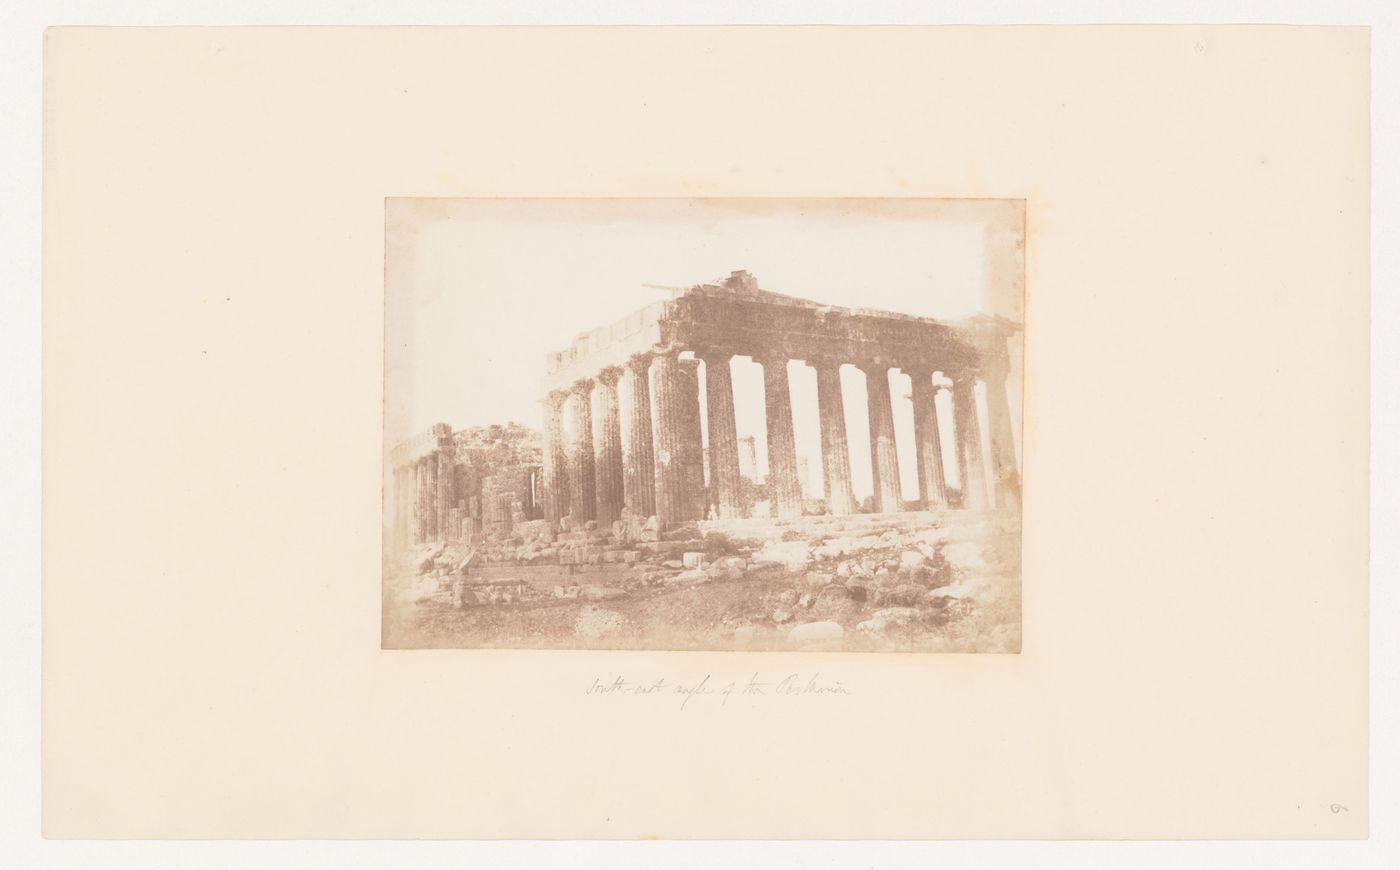 The south-east angle of The Parthenon